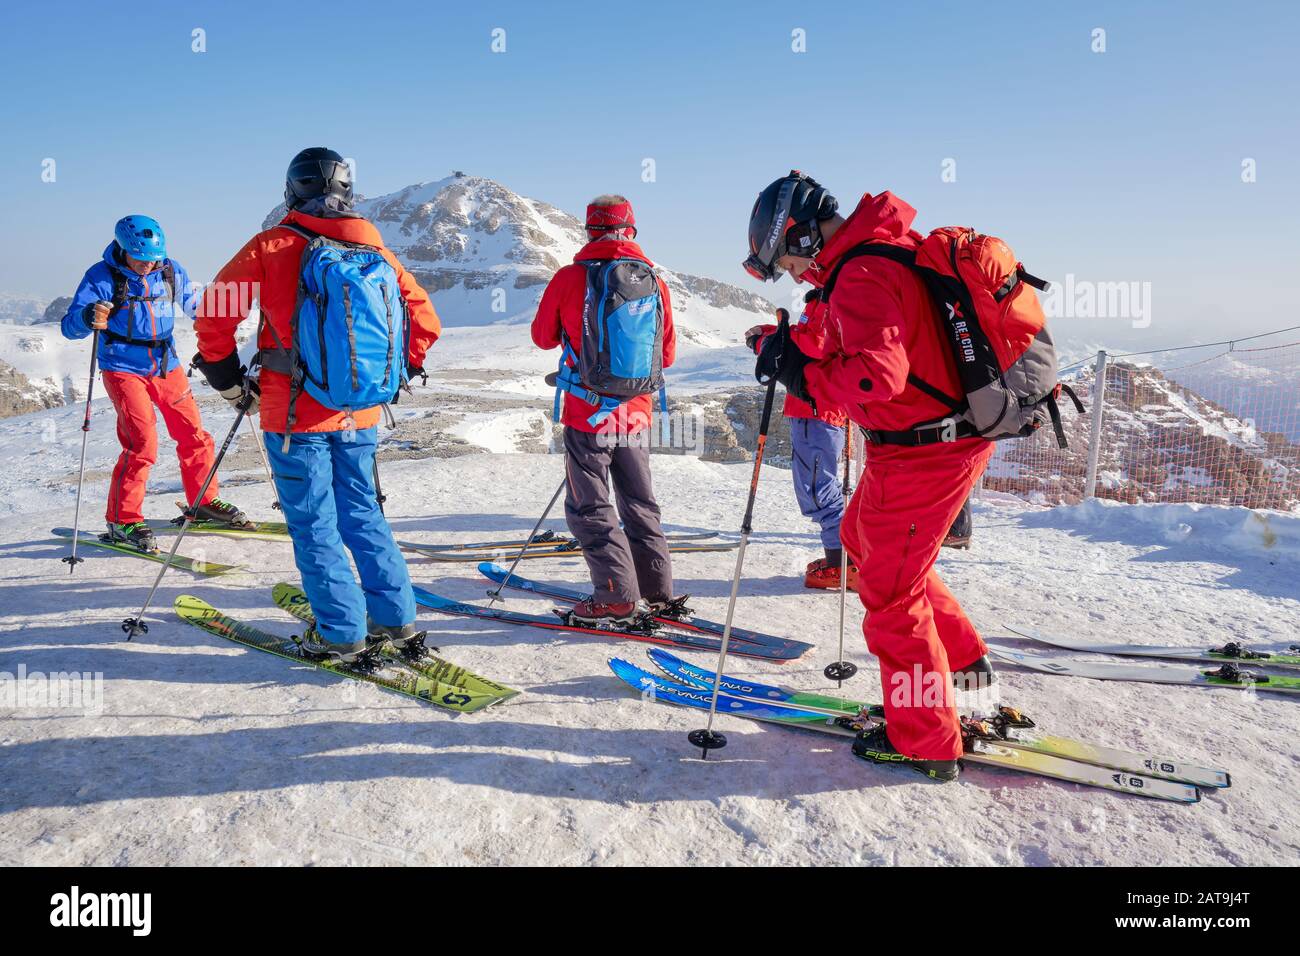 Dolomites, Italy - January 24, 2020: Group of off-piste skiers and their guide preparing to start a tour in Dolomites mountains, Italy. Stock Photo